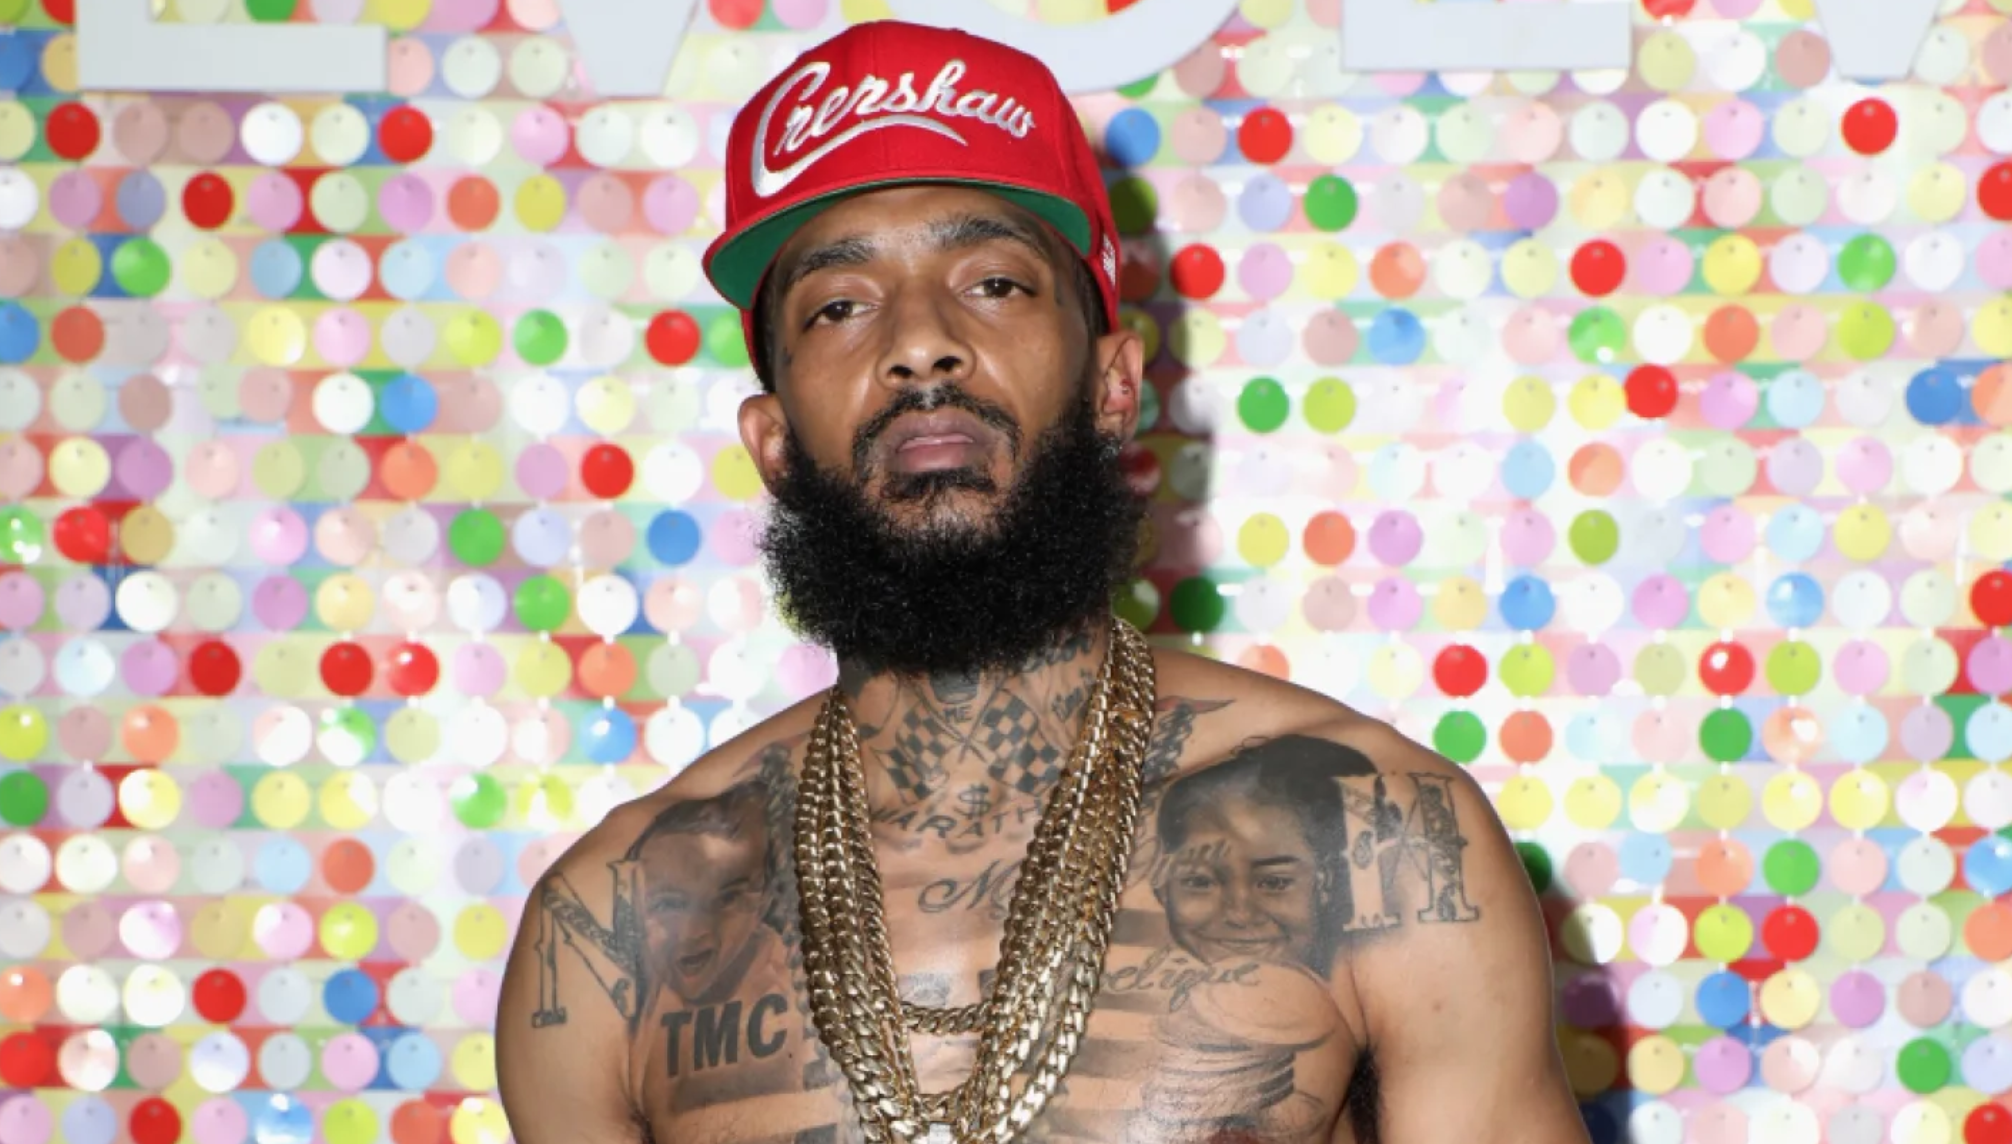 Eric Holder Jr., Nipsey Hussle’s Killer, Sentenced To 60 Years To Life In Prison